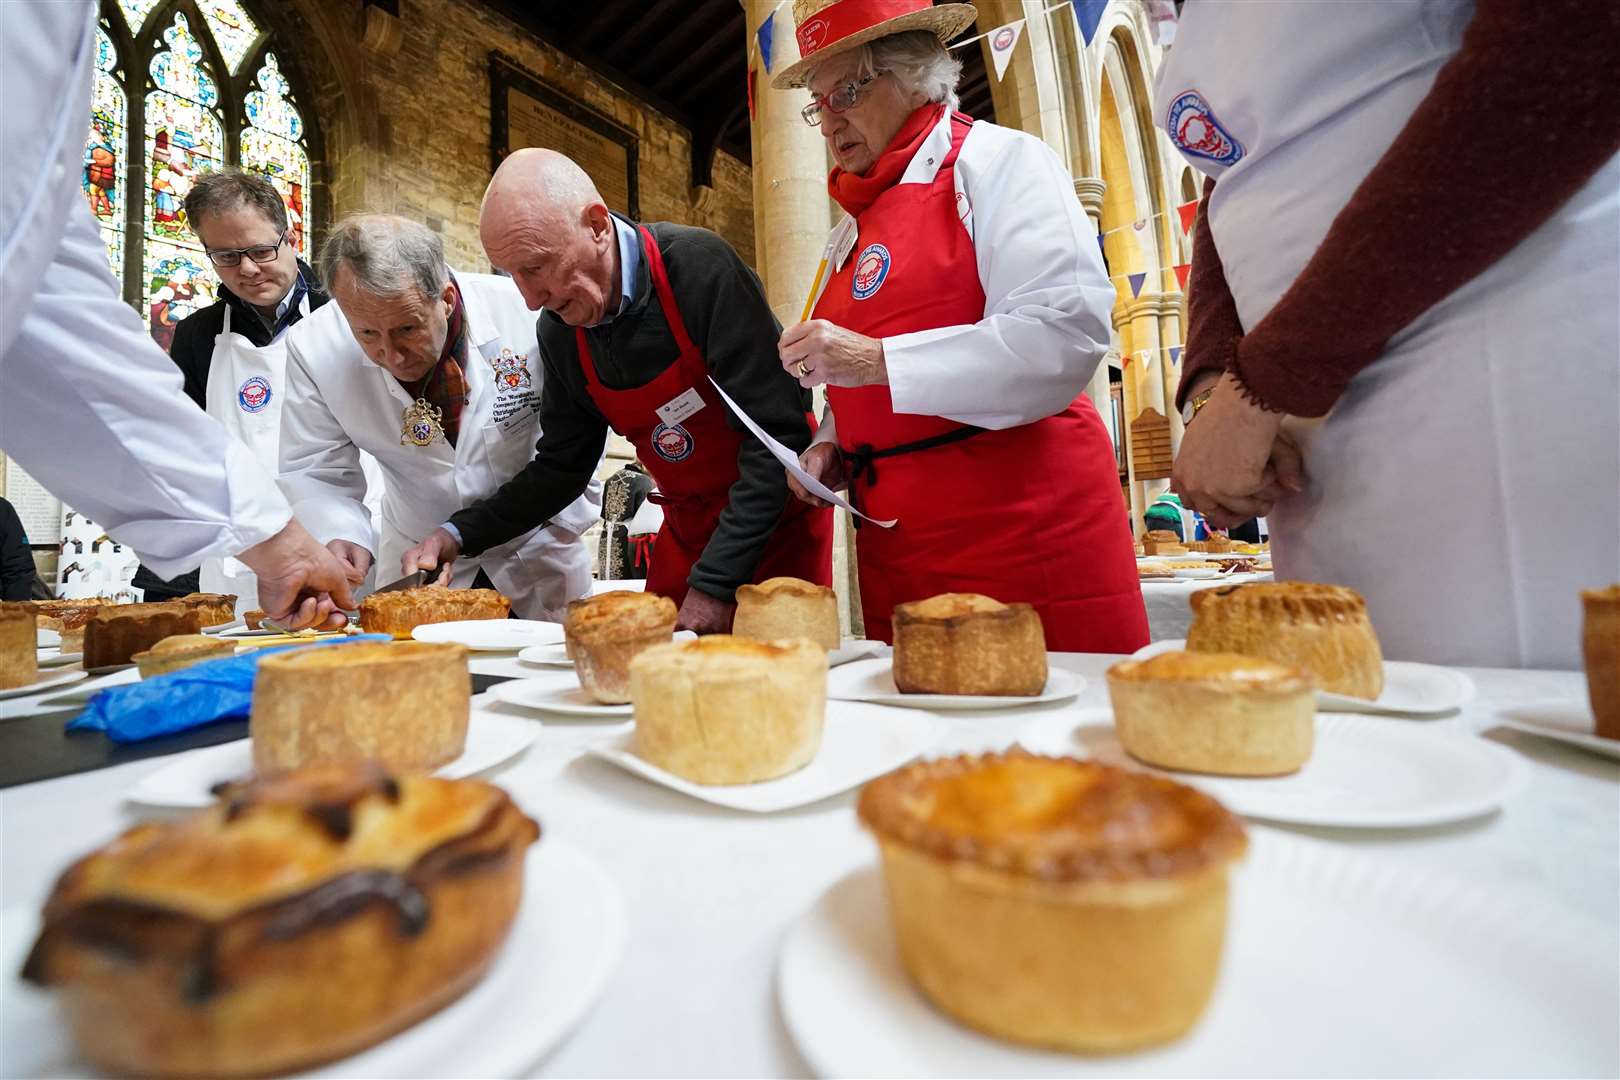 The contest at St Mary’s Church in Melton Mowbray (Jacob King/PA)